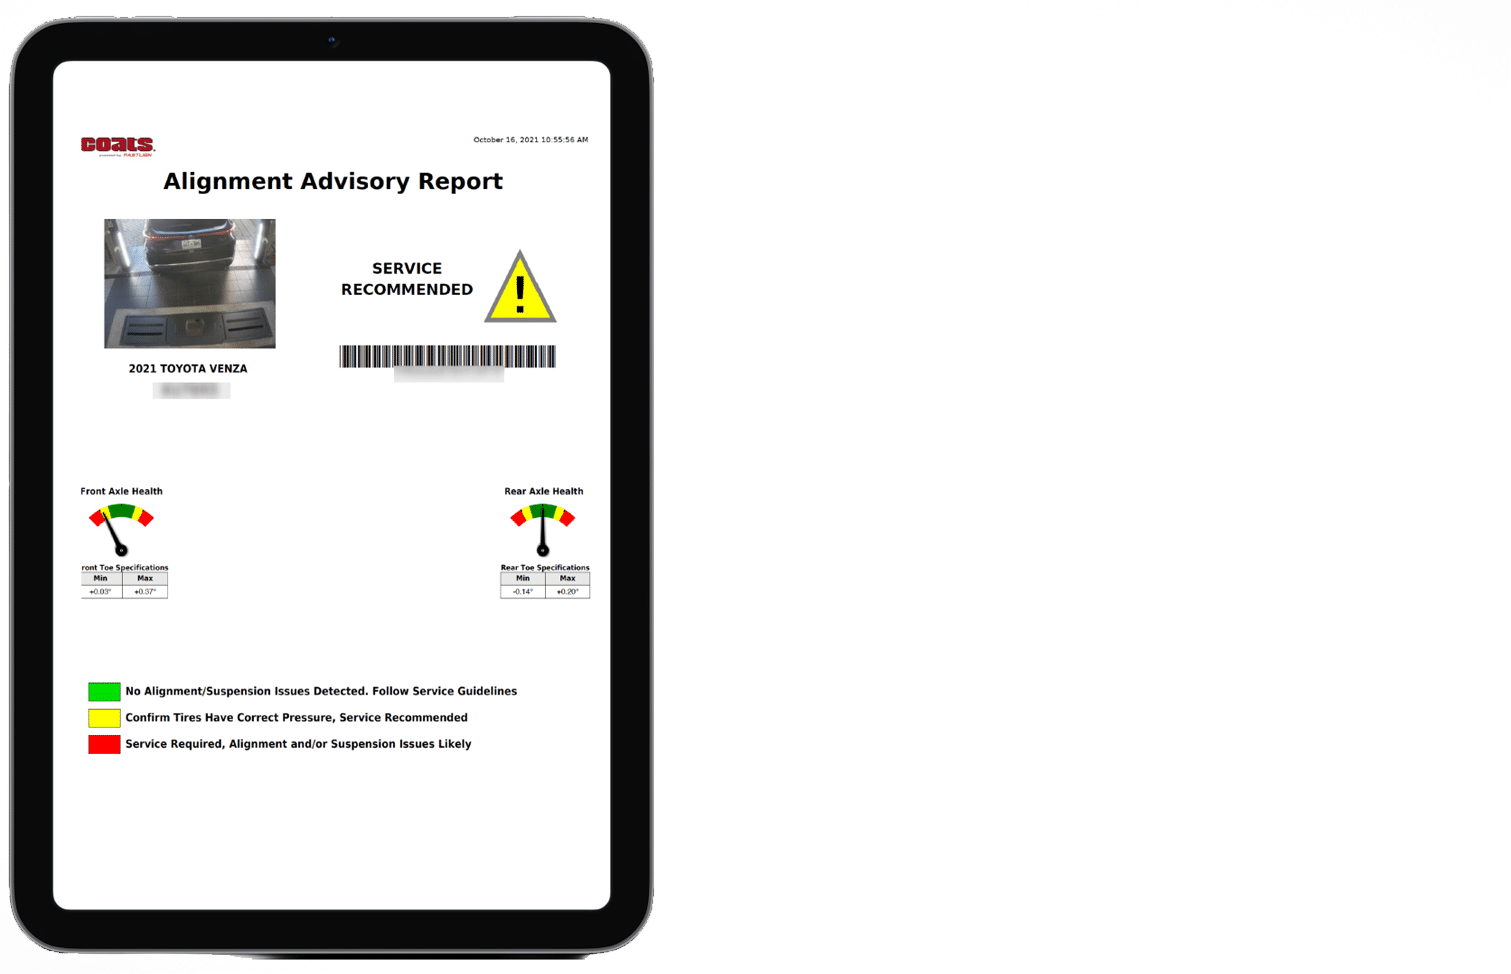 A tablet shows the “Alignment Advisory Report” detailing the health of the front and rear axles and that the car which drove through the inspection lane is recommended for an alignment service